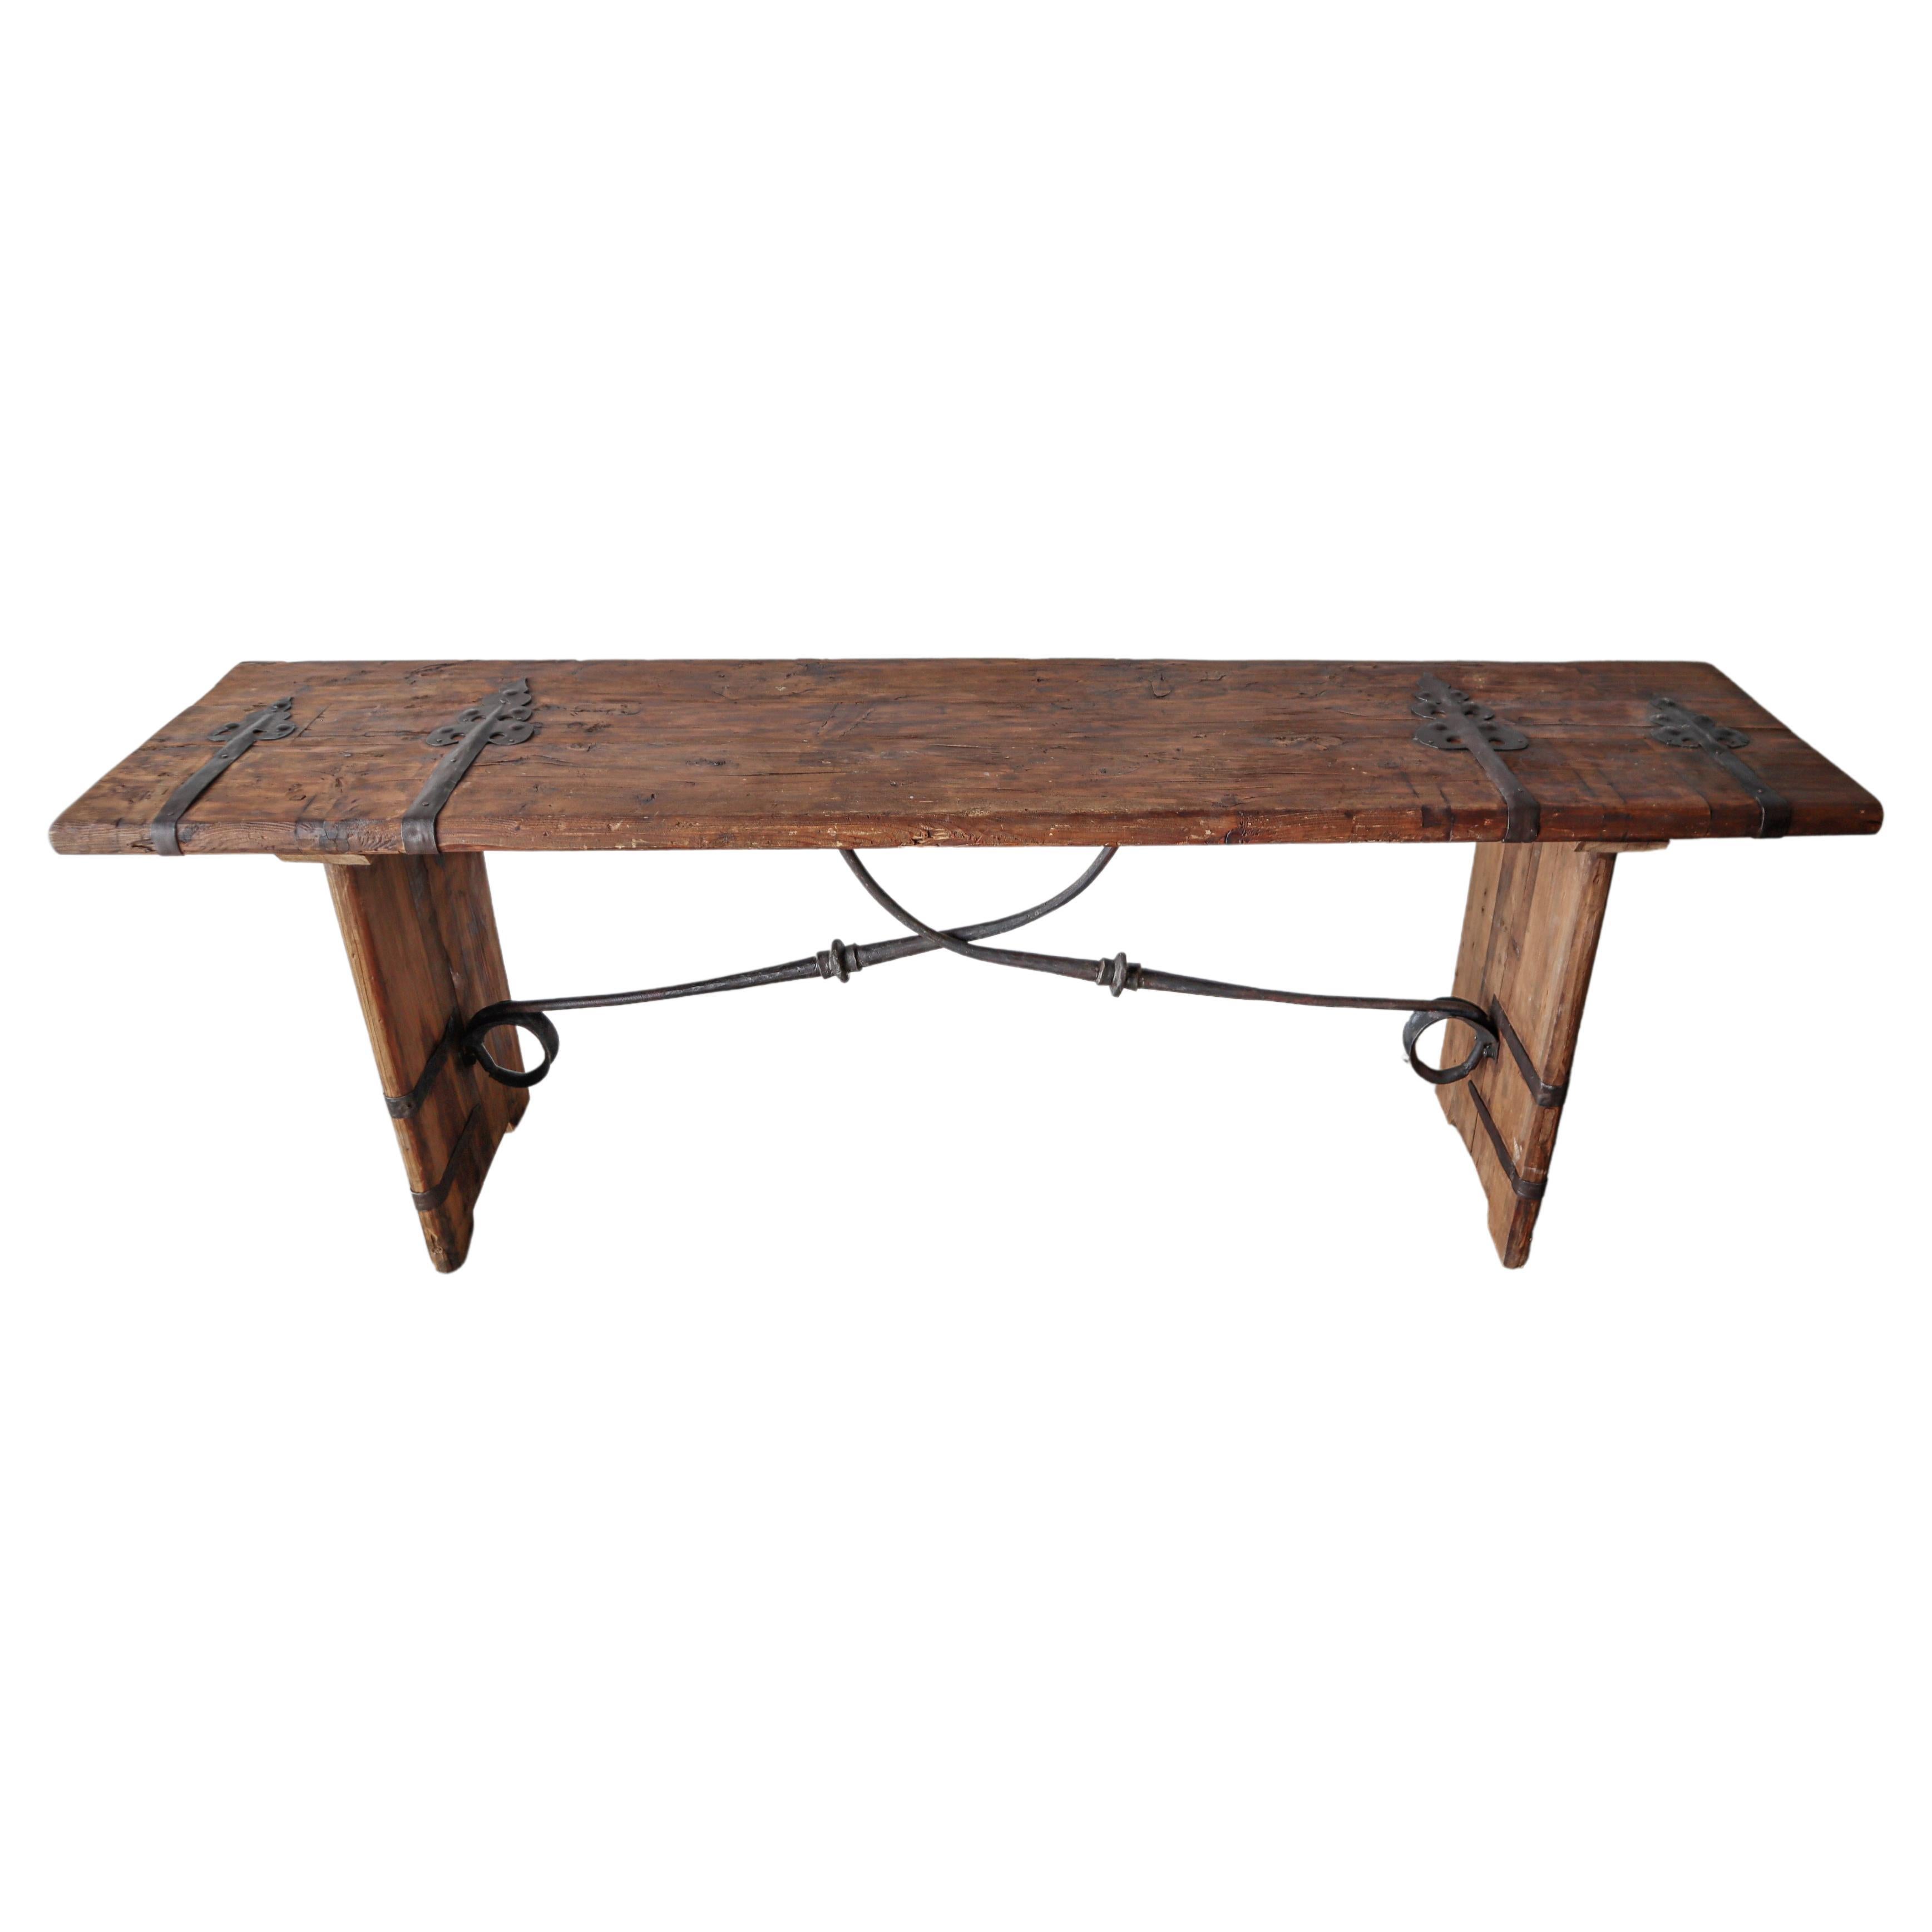 8ft Rustic Reclaimed Wood and Iron Console Table